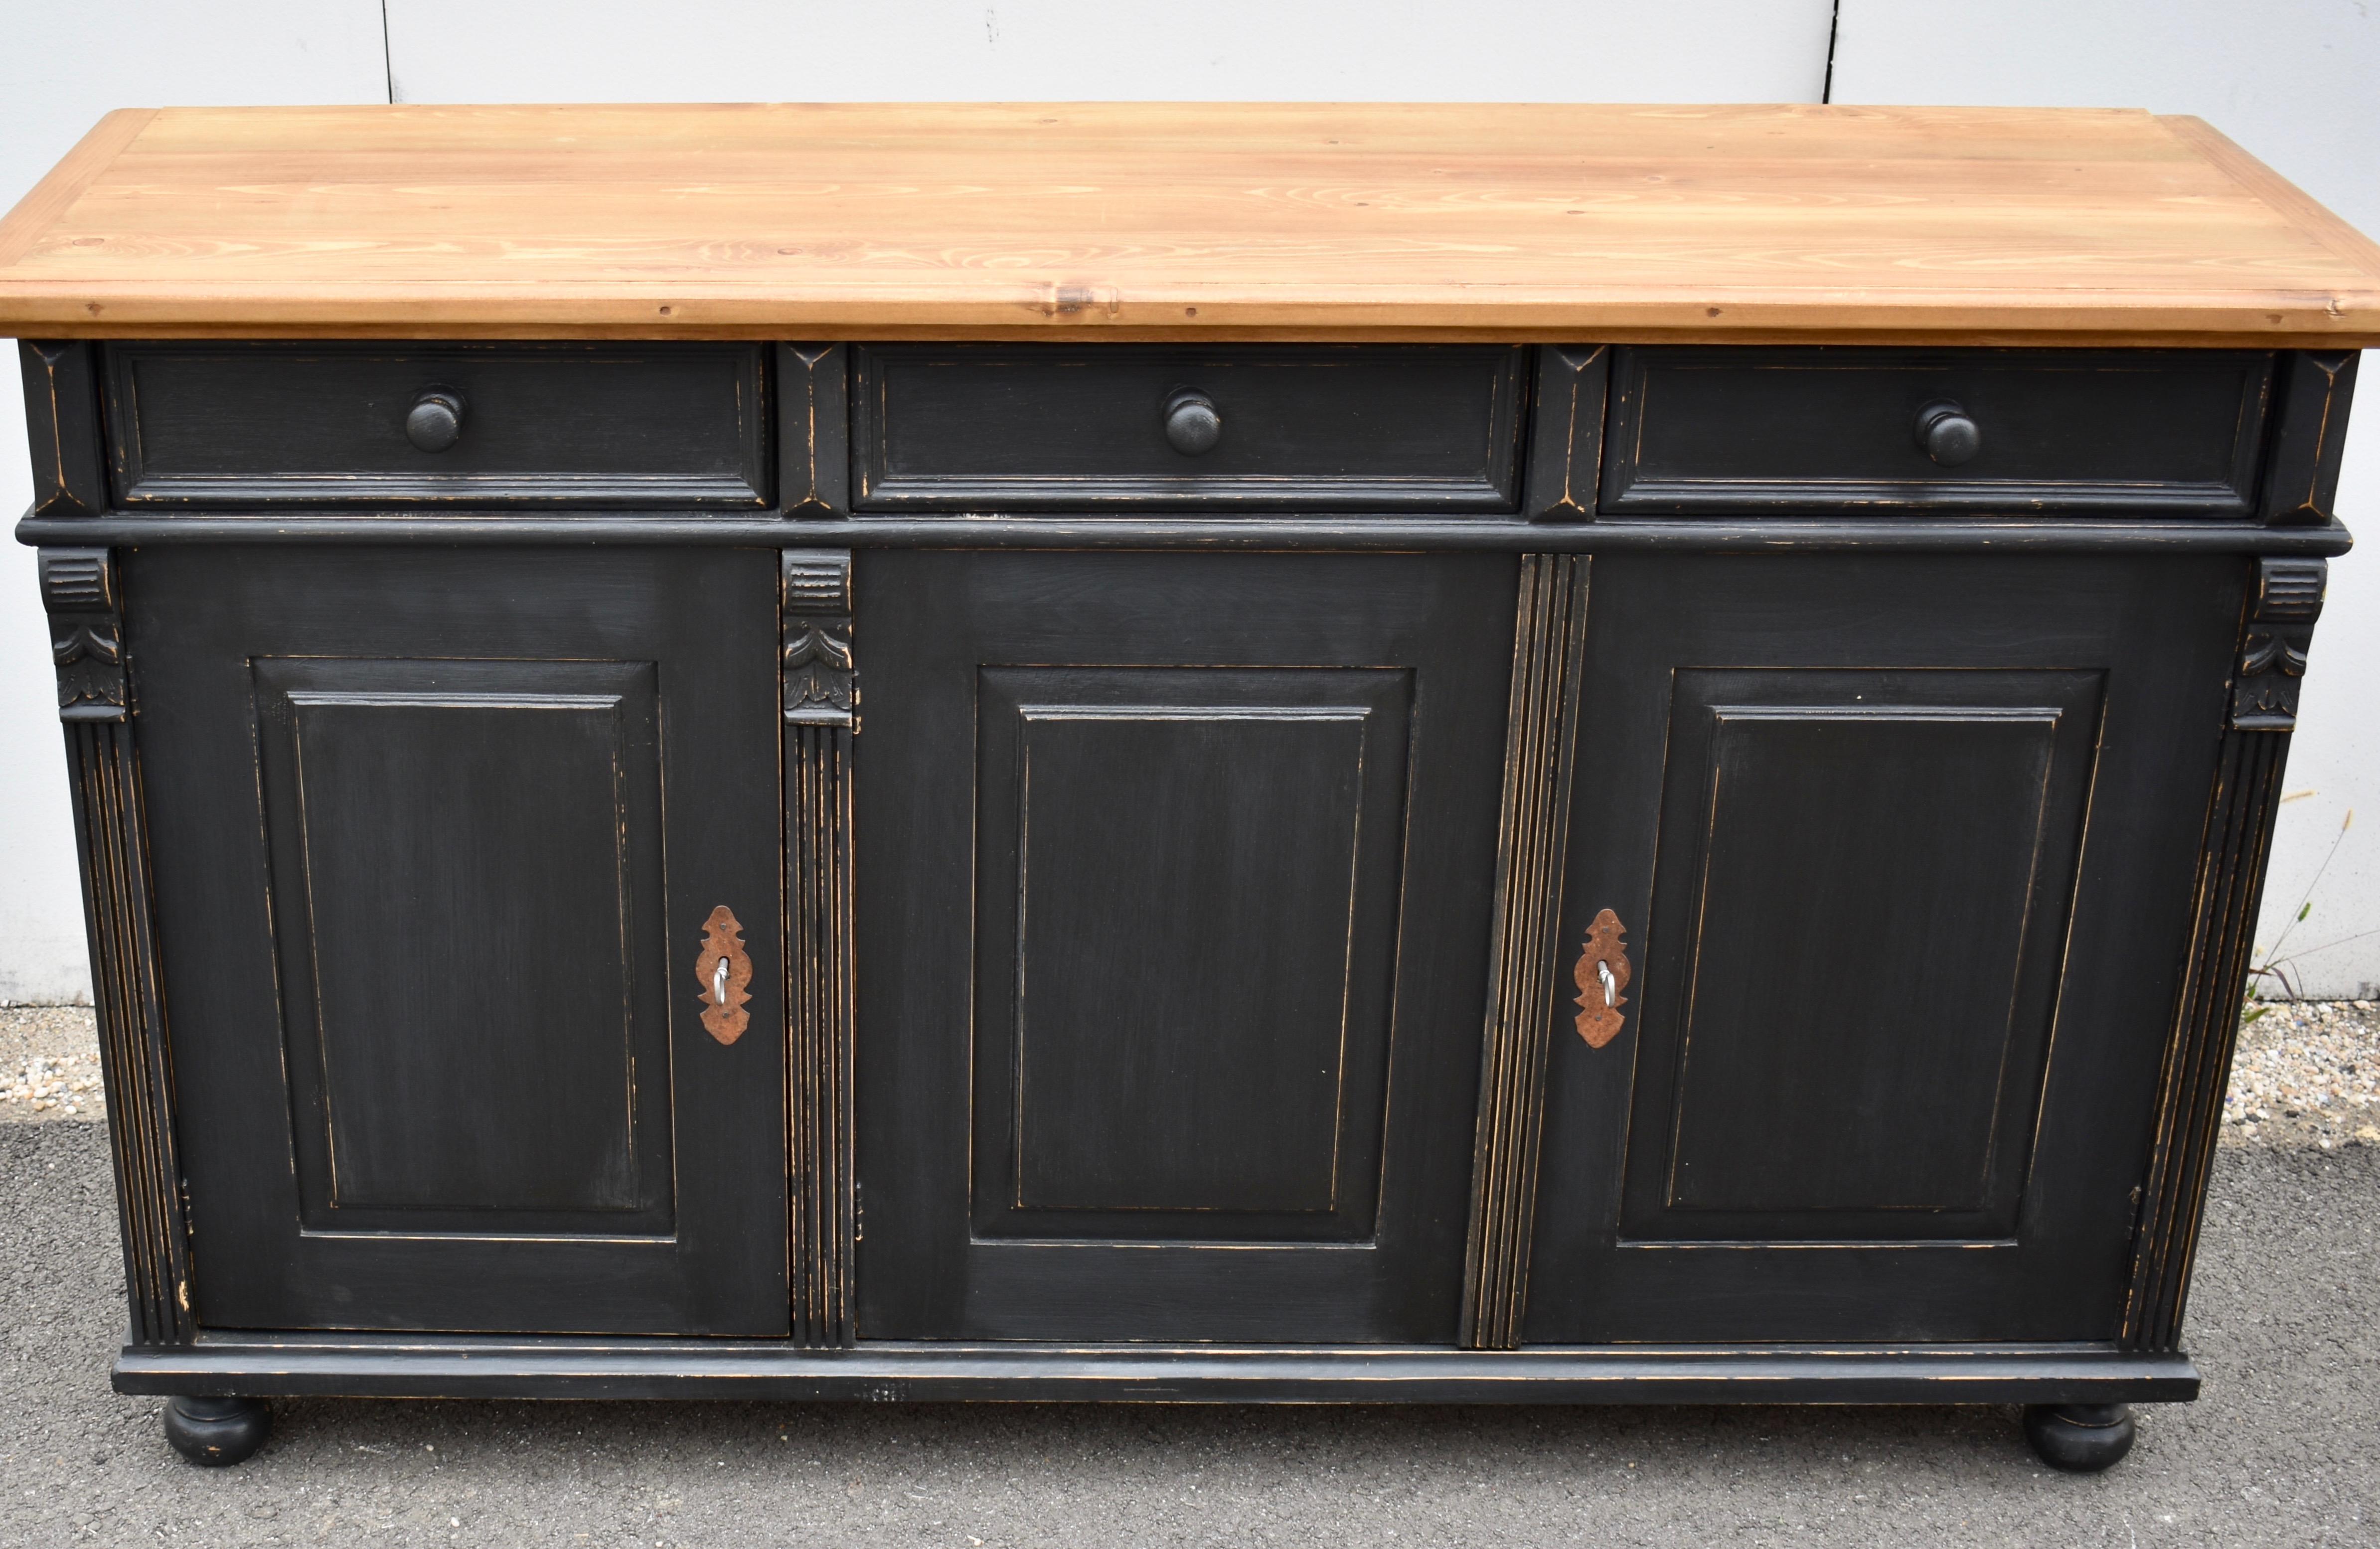 Antique pine sideboards can be hard to find so our workshop in Europe takes good quality European yellow pine to build this piece using traditional design features and construction techniques.  In this case the sideboard base is hand-painted in